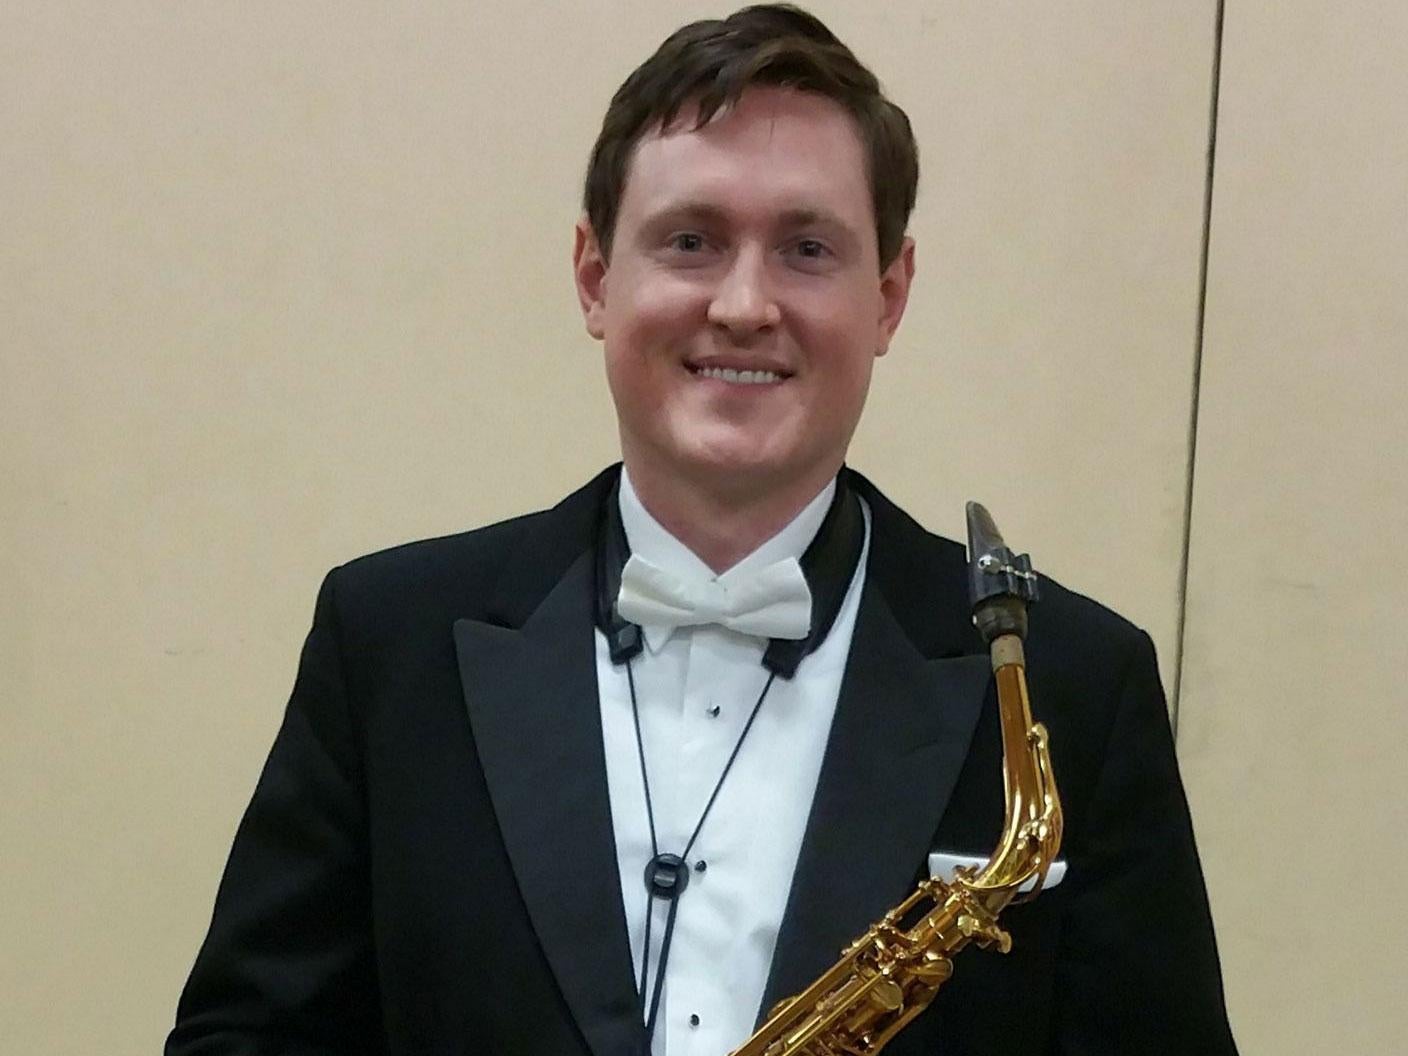 Chris Toon teaches saxophone and flute at Nottingham High School